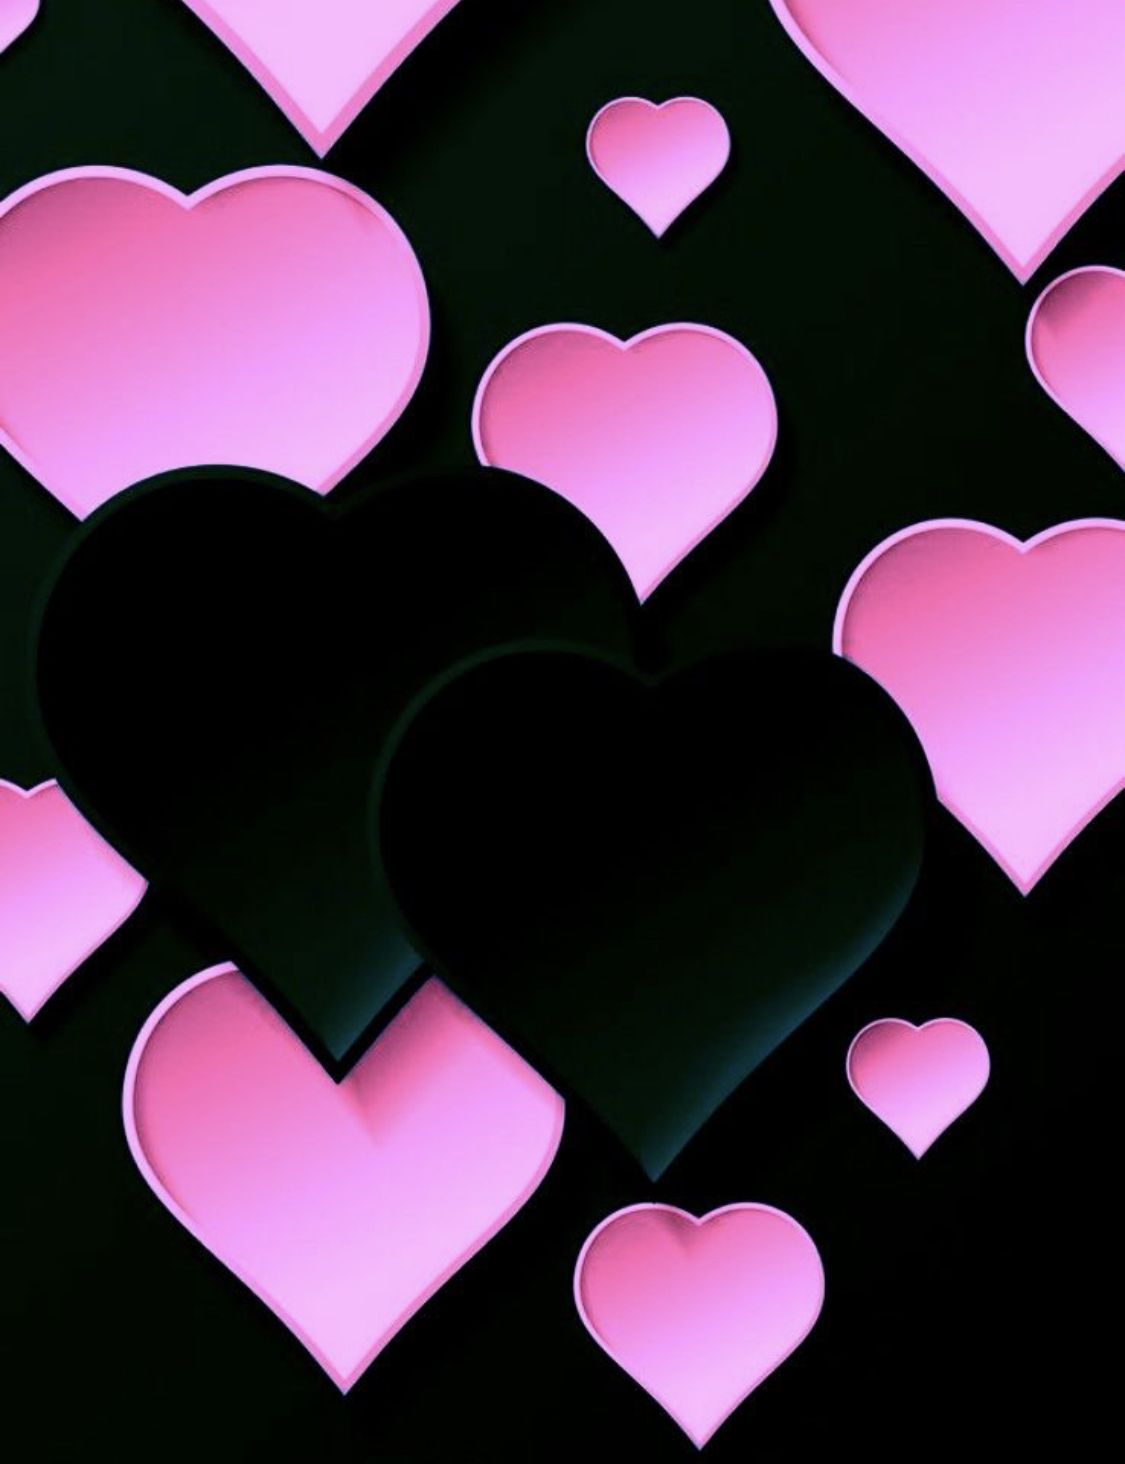 Black and Pink Heart Wallpaper Free Black and Pink Heart Background